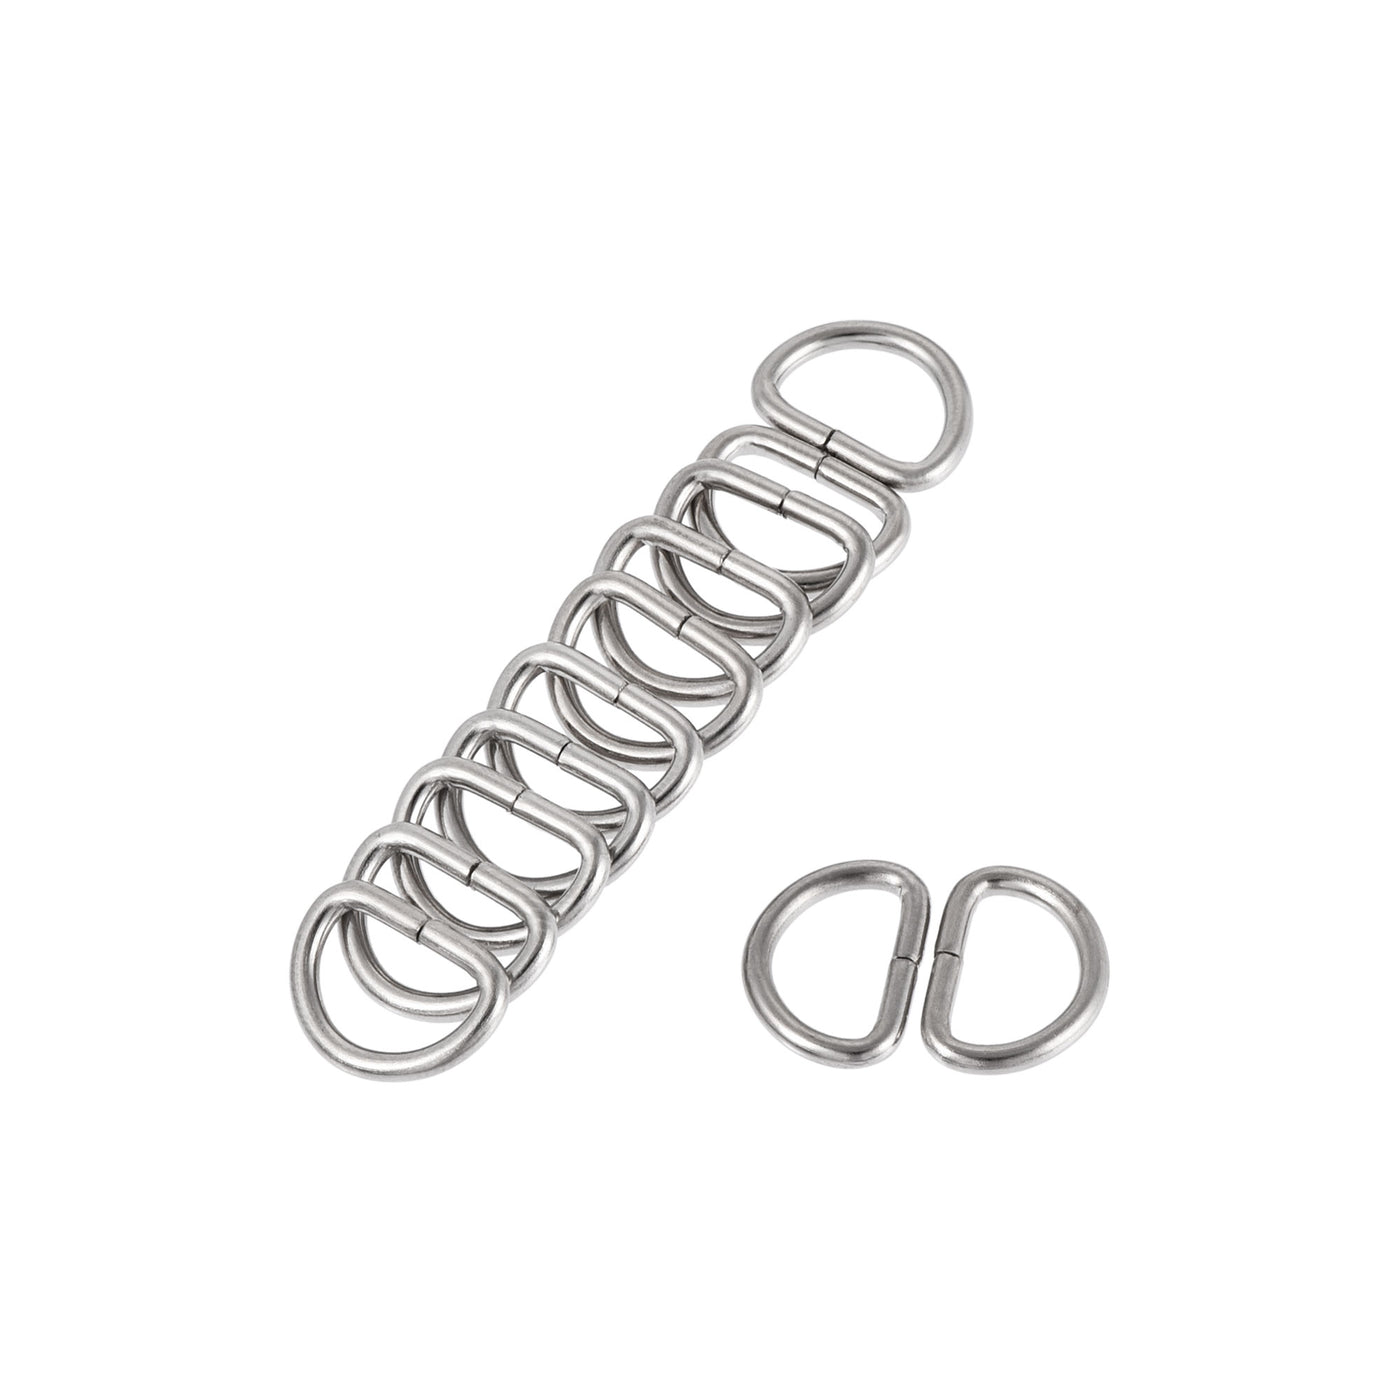 uxcell Uxcell Metal D Ring 0.39"(10mm) D-Rings Buckle for Hardware Bags Belts Craft DIY Accessories Silver Tone 50pcs